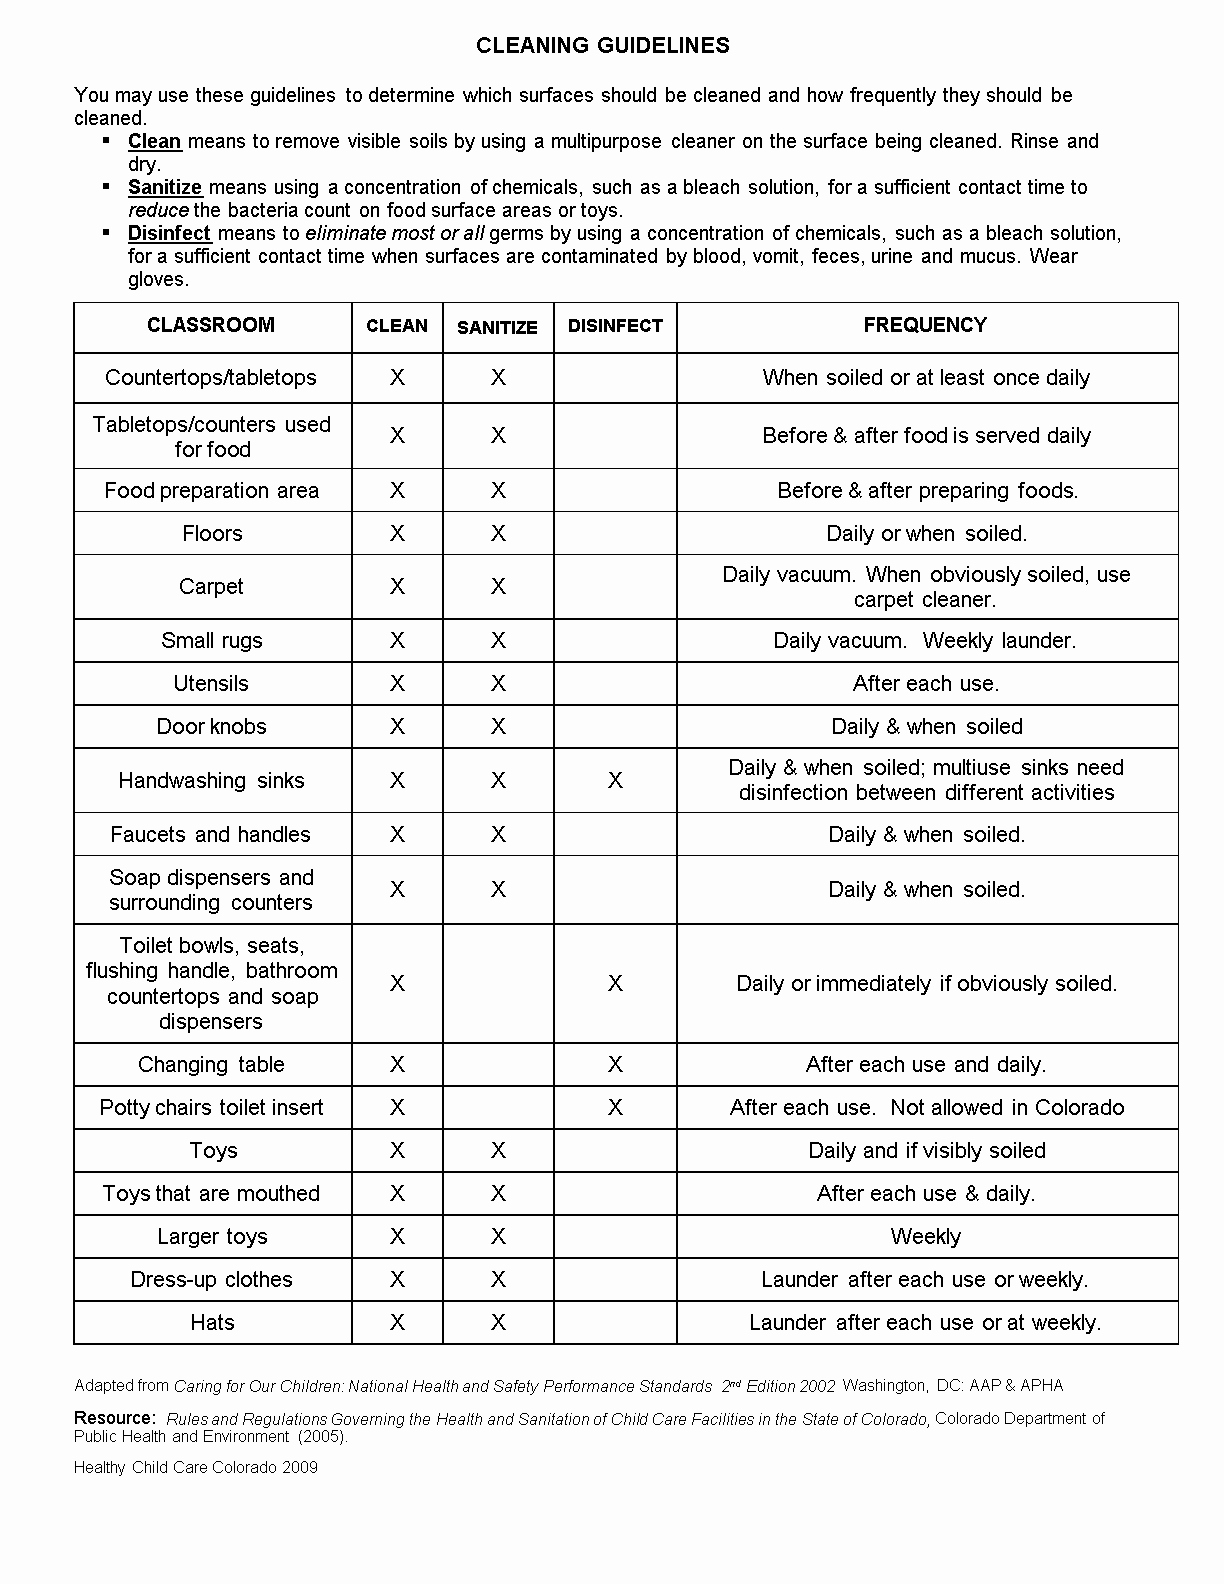 Daycare Cleaning Checklist Templates Unique Cleaning Guidelines Daycare Dreams